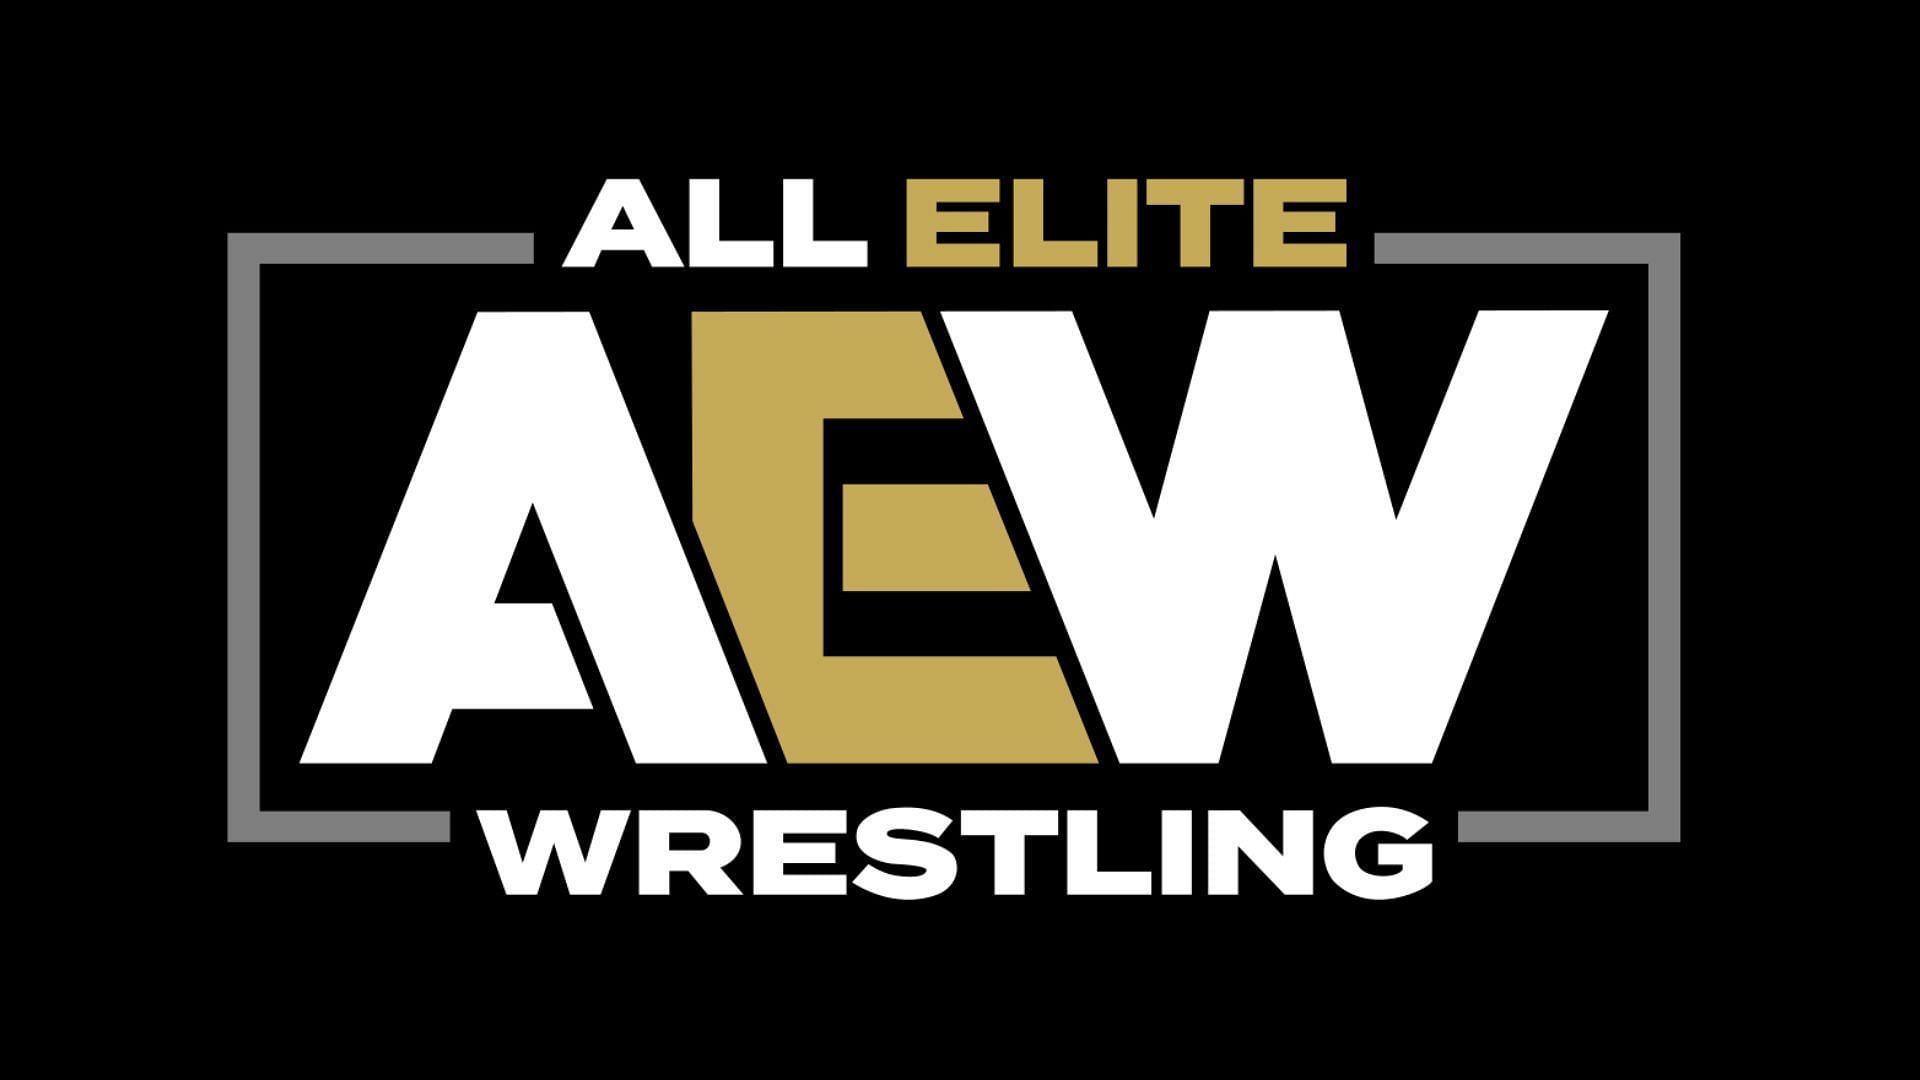 A top AEW star makes a shocking announcement about his career.